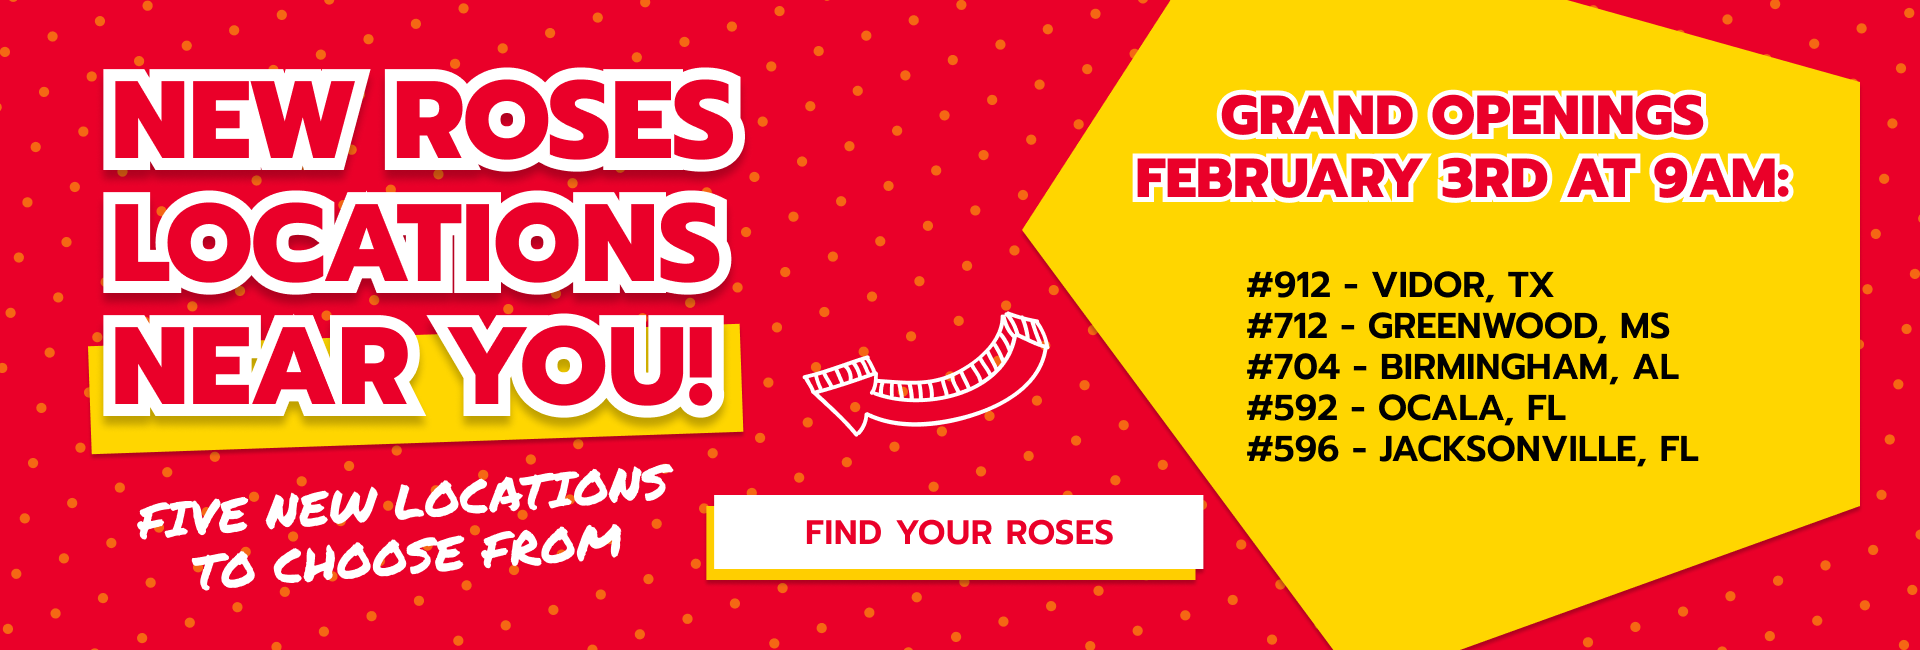 Designed banner with headline text that reads “New Roses Locations Near You!” and subheading that reads “Five New Locations to Choose From” with a button with text that reads “Find Your Roses” and goes to the Store Locator Page. Additional headline reads “Grand Openings February 3rd at 9am” with text underneath listing the new Roses locations “Store #912 - Vidor, Texas. Store #712 - Greenwood, Mississippi. Store #704 - Birmingham, Alabama. Store #592 - Ocala, Florida. Store #596 - Jacksonville, Florida.